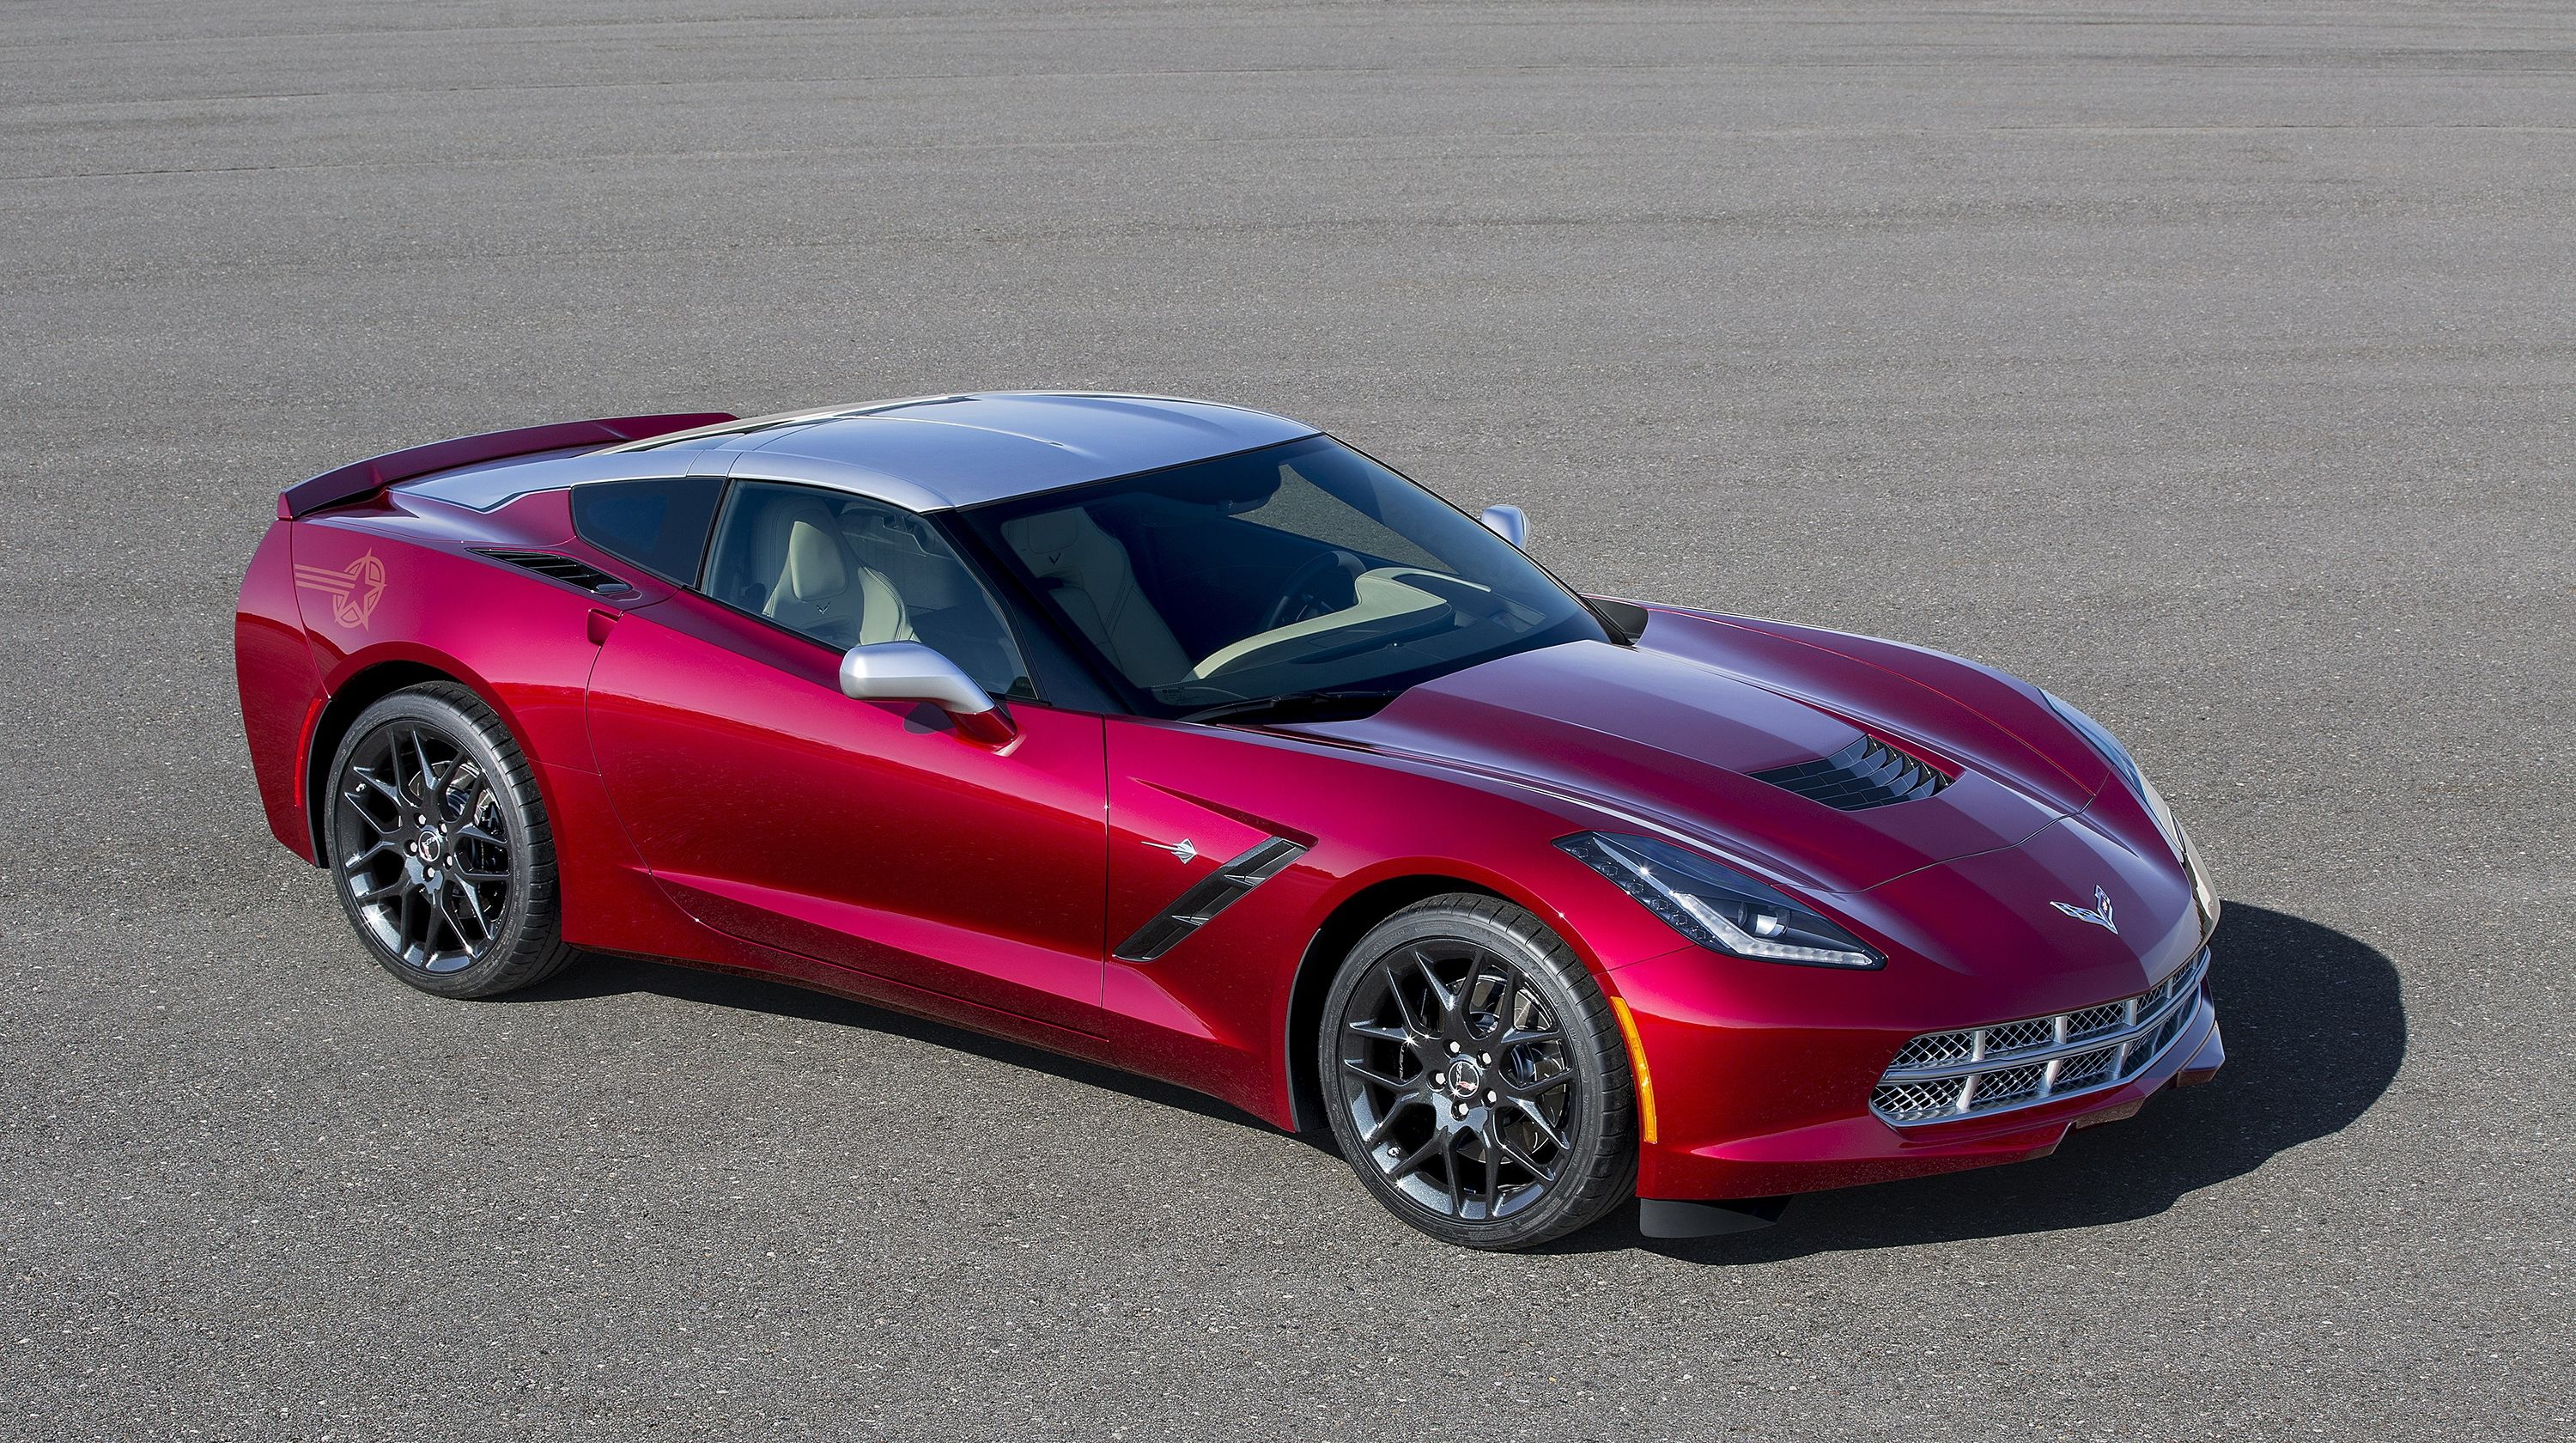  Ever wonder what Paul Stanley from KISS would do with a 2015 Corvette Stingray? Well, here's your answer. 